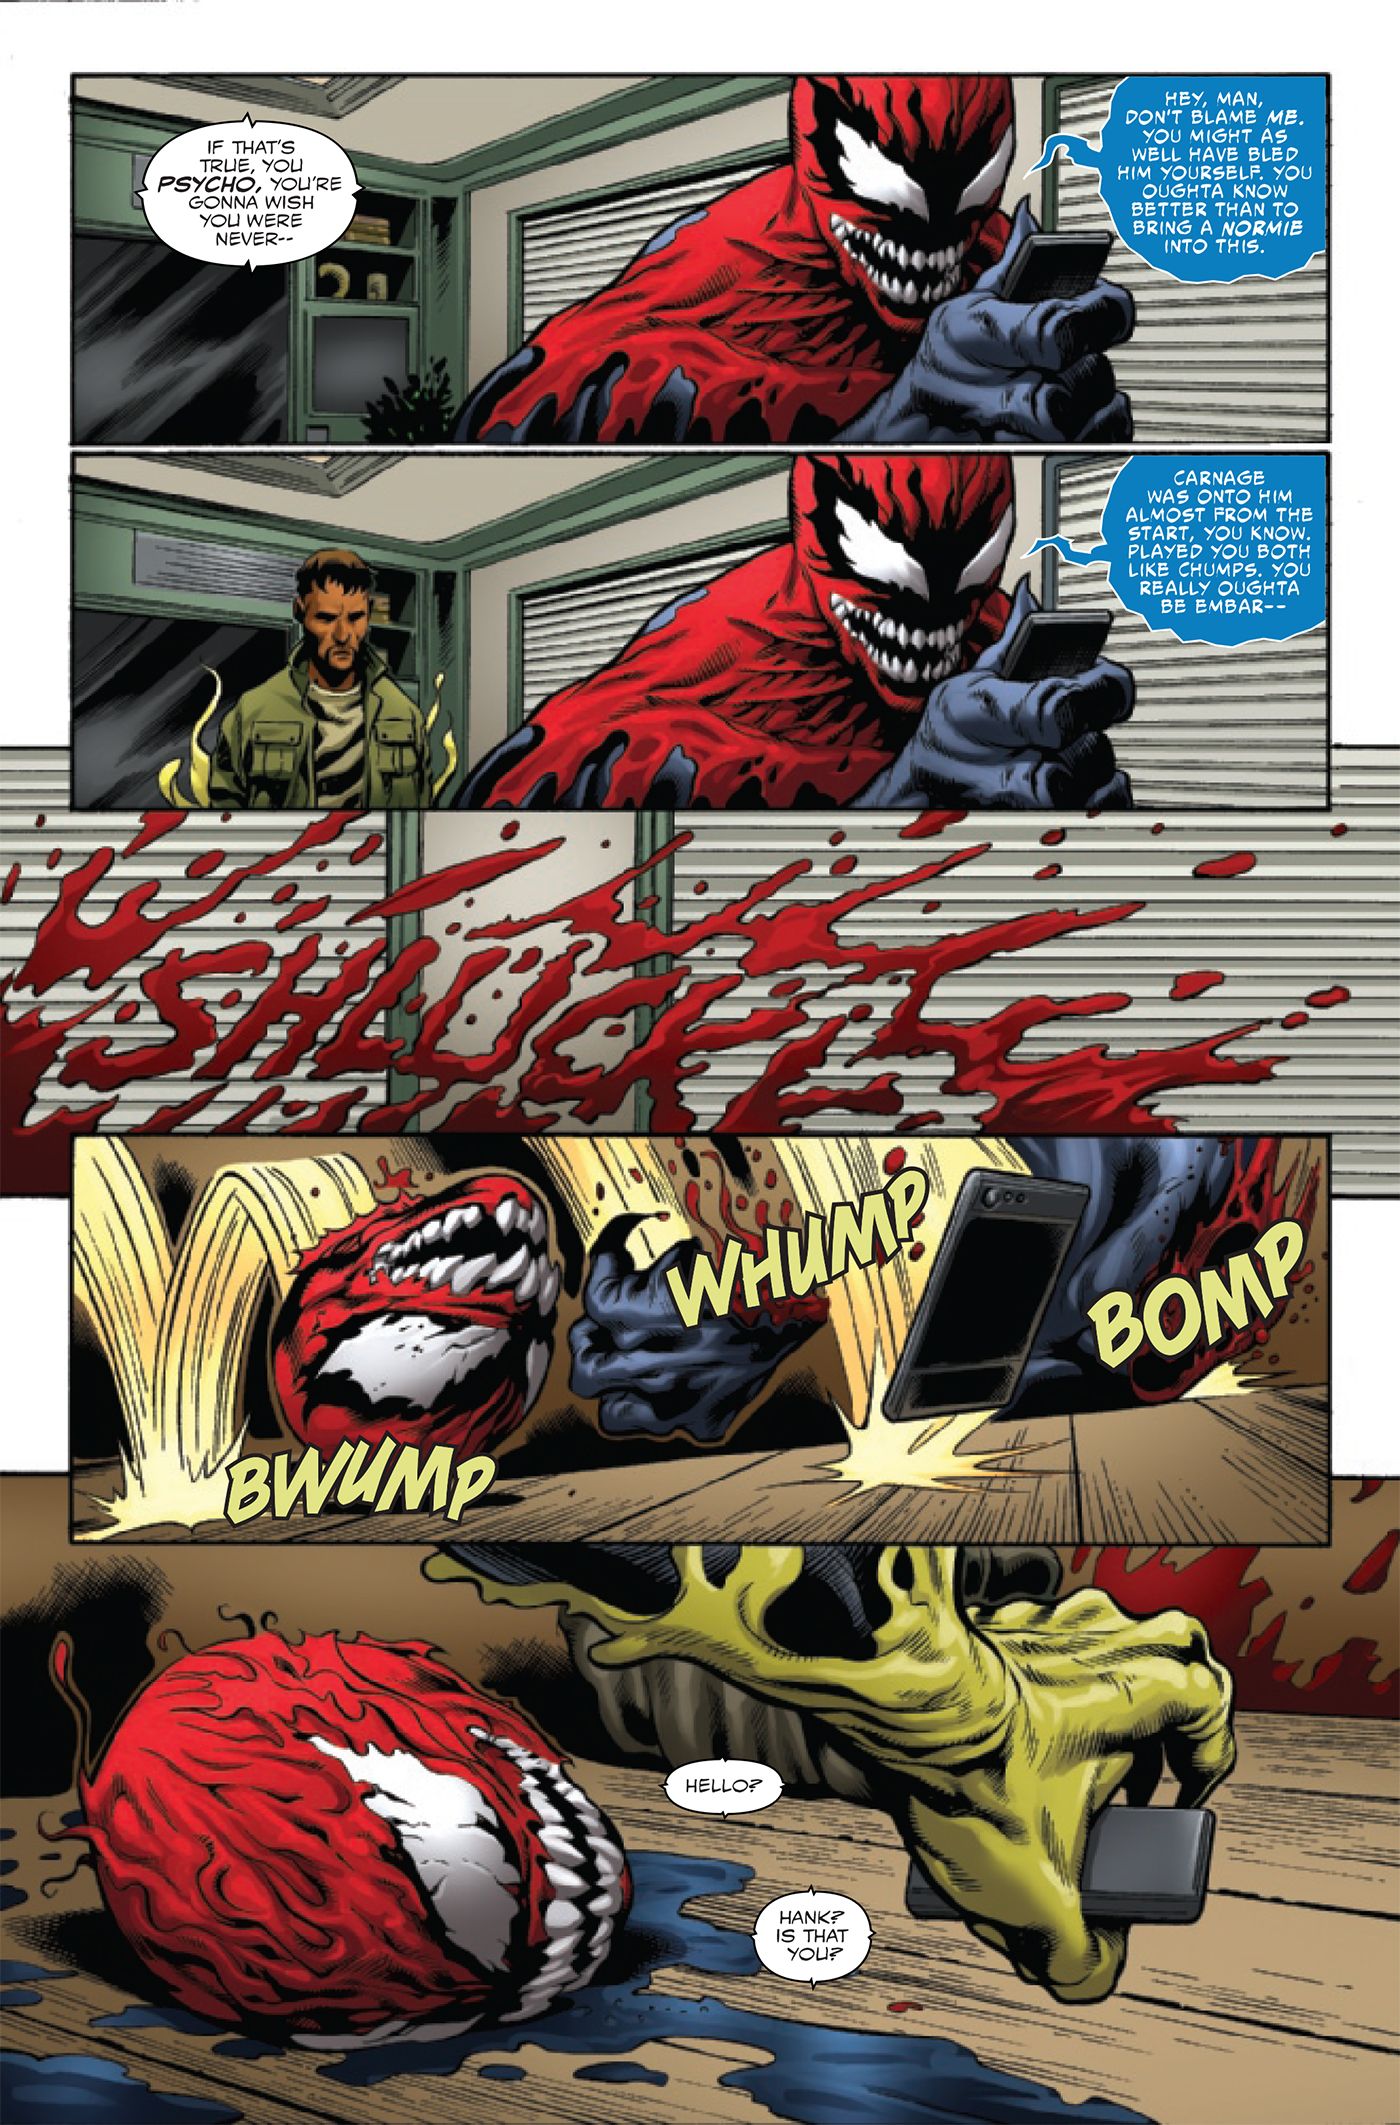 Extreme Carnage Omega #1 preview pages